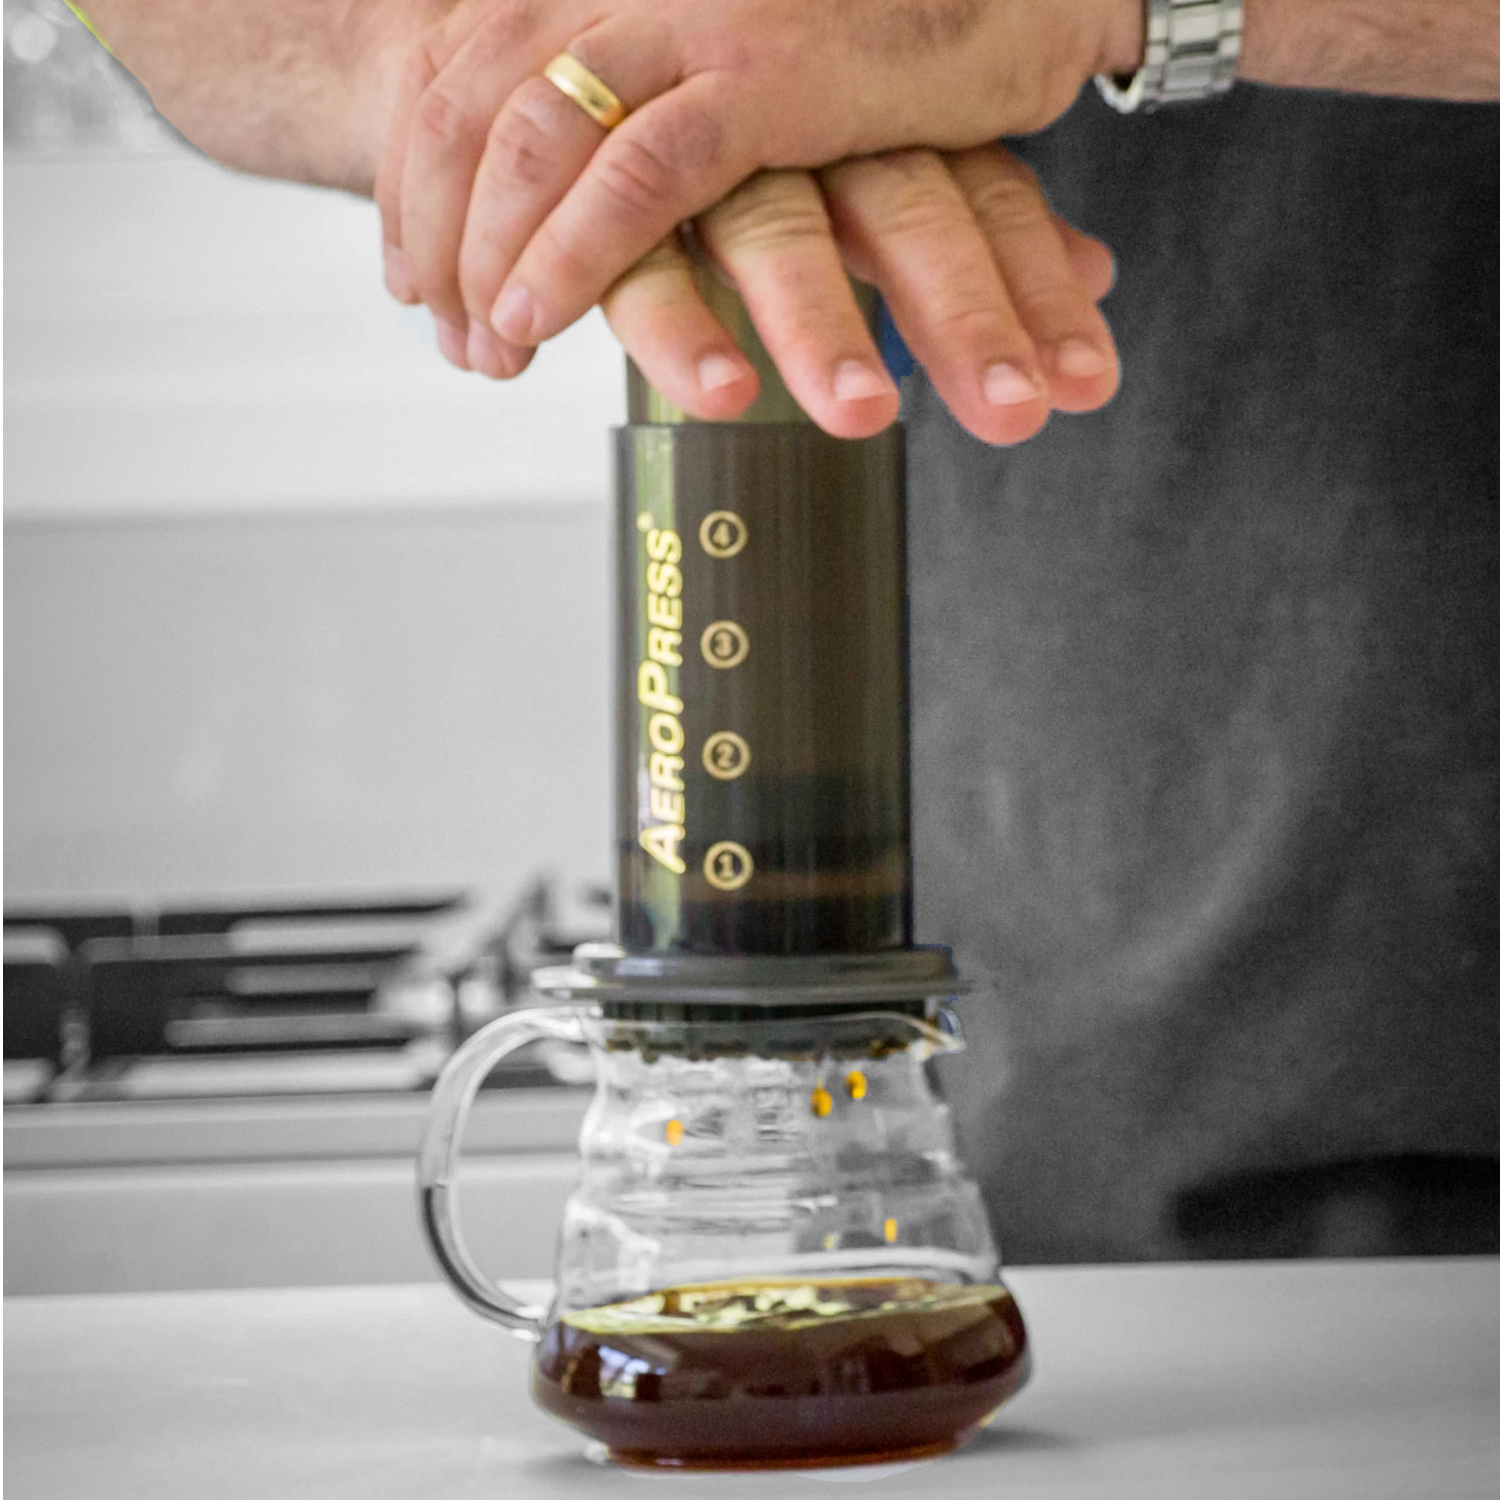 AeroPress coffee maker being pressed down to filter and brew the coffee. The coffee falls into the glass carafe. 